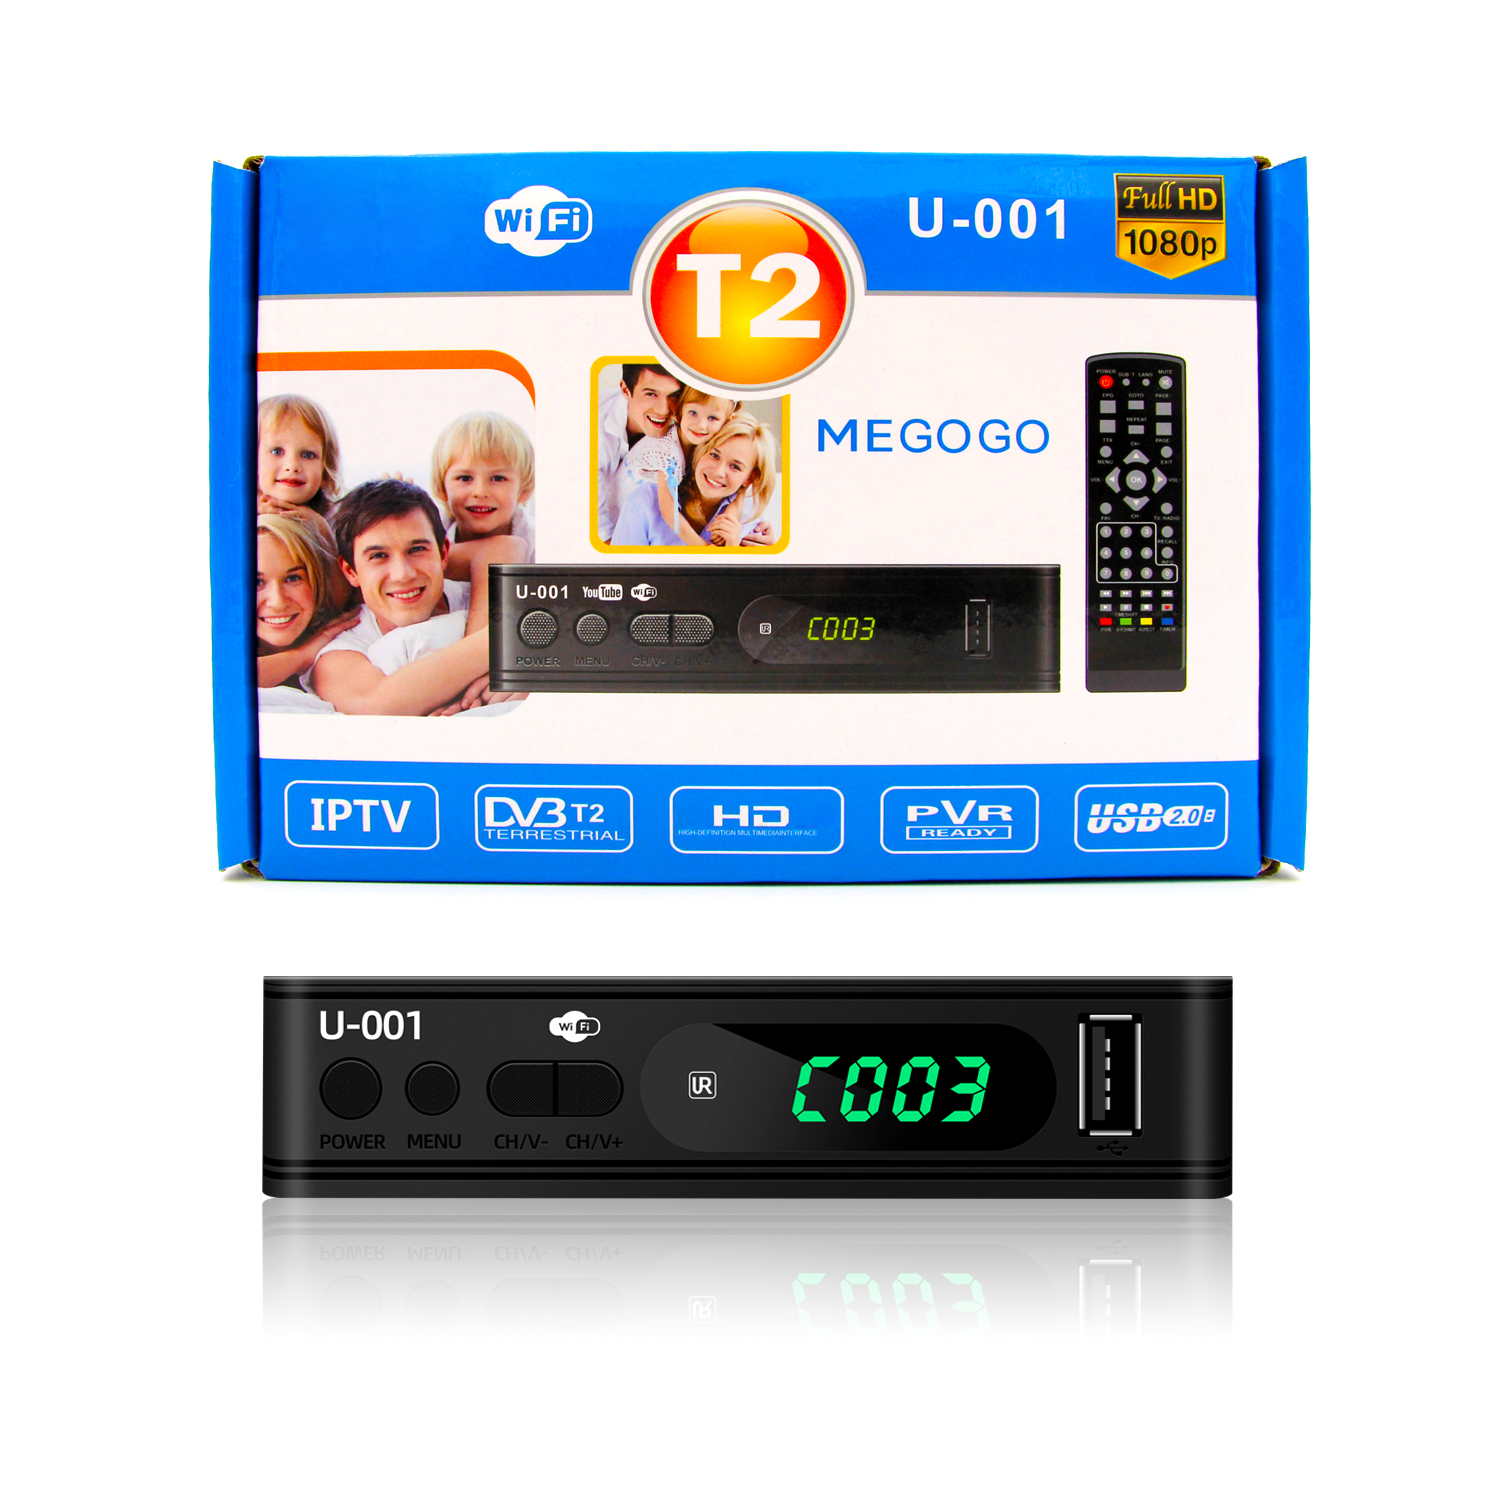 The Ultimate Guide to DVB T2 TV Box: Features and Advantages